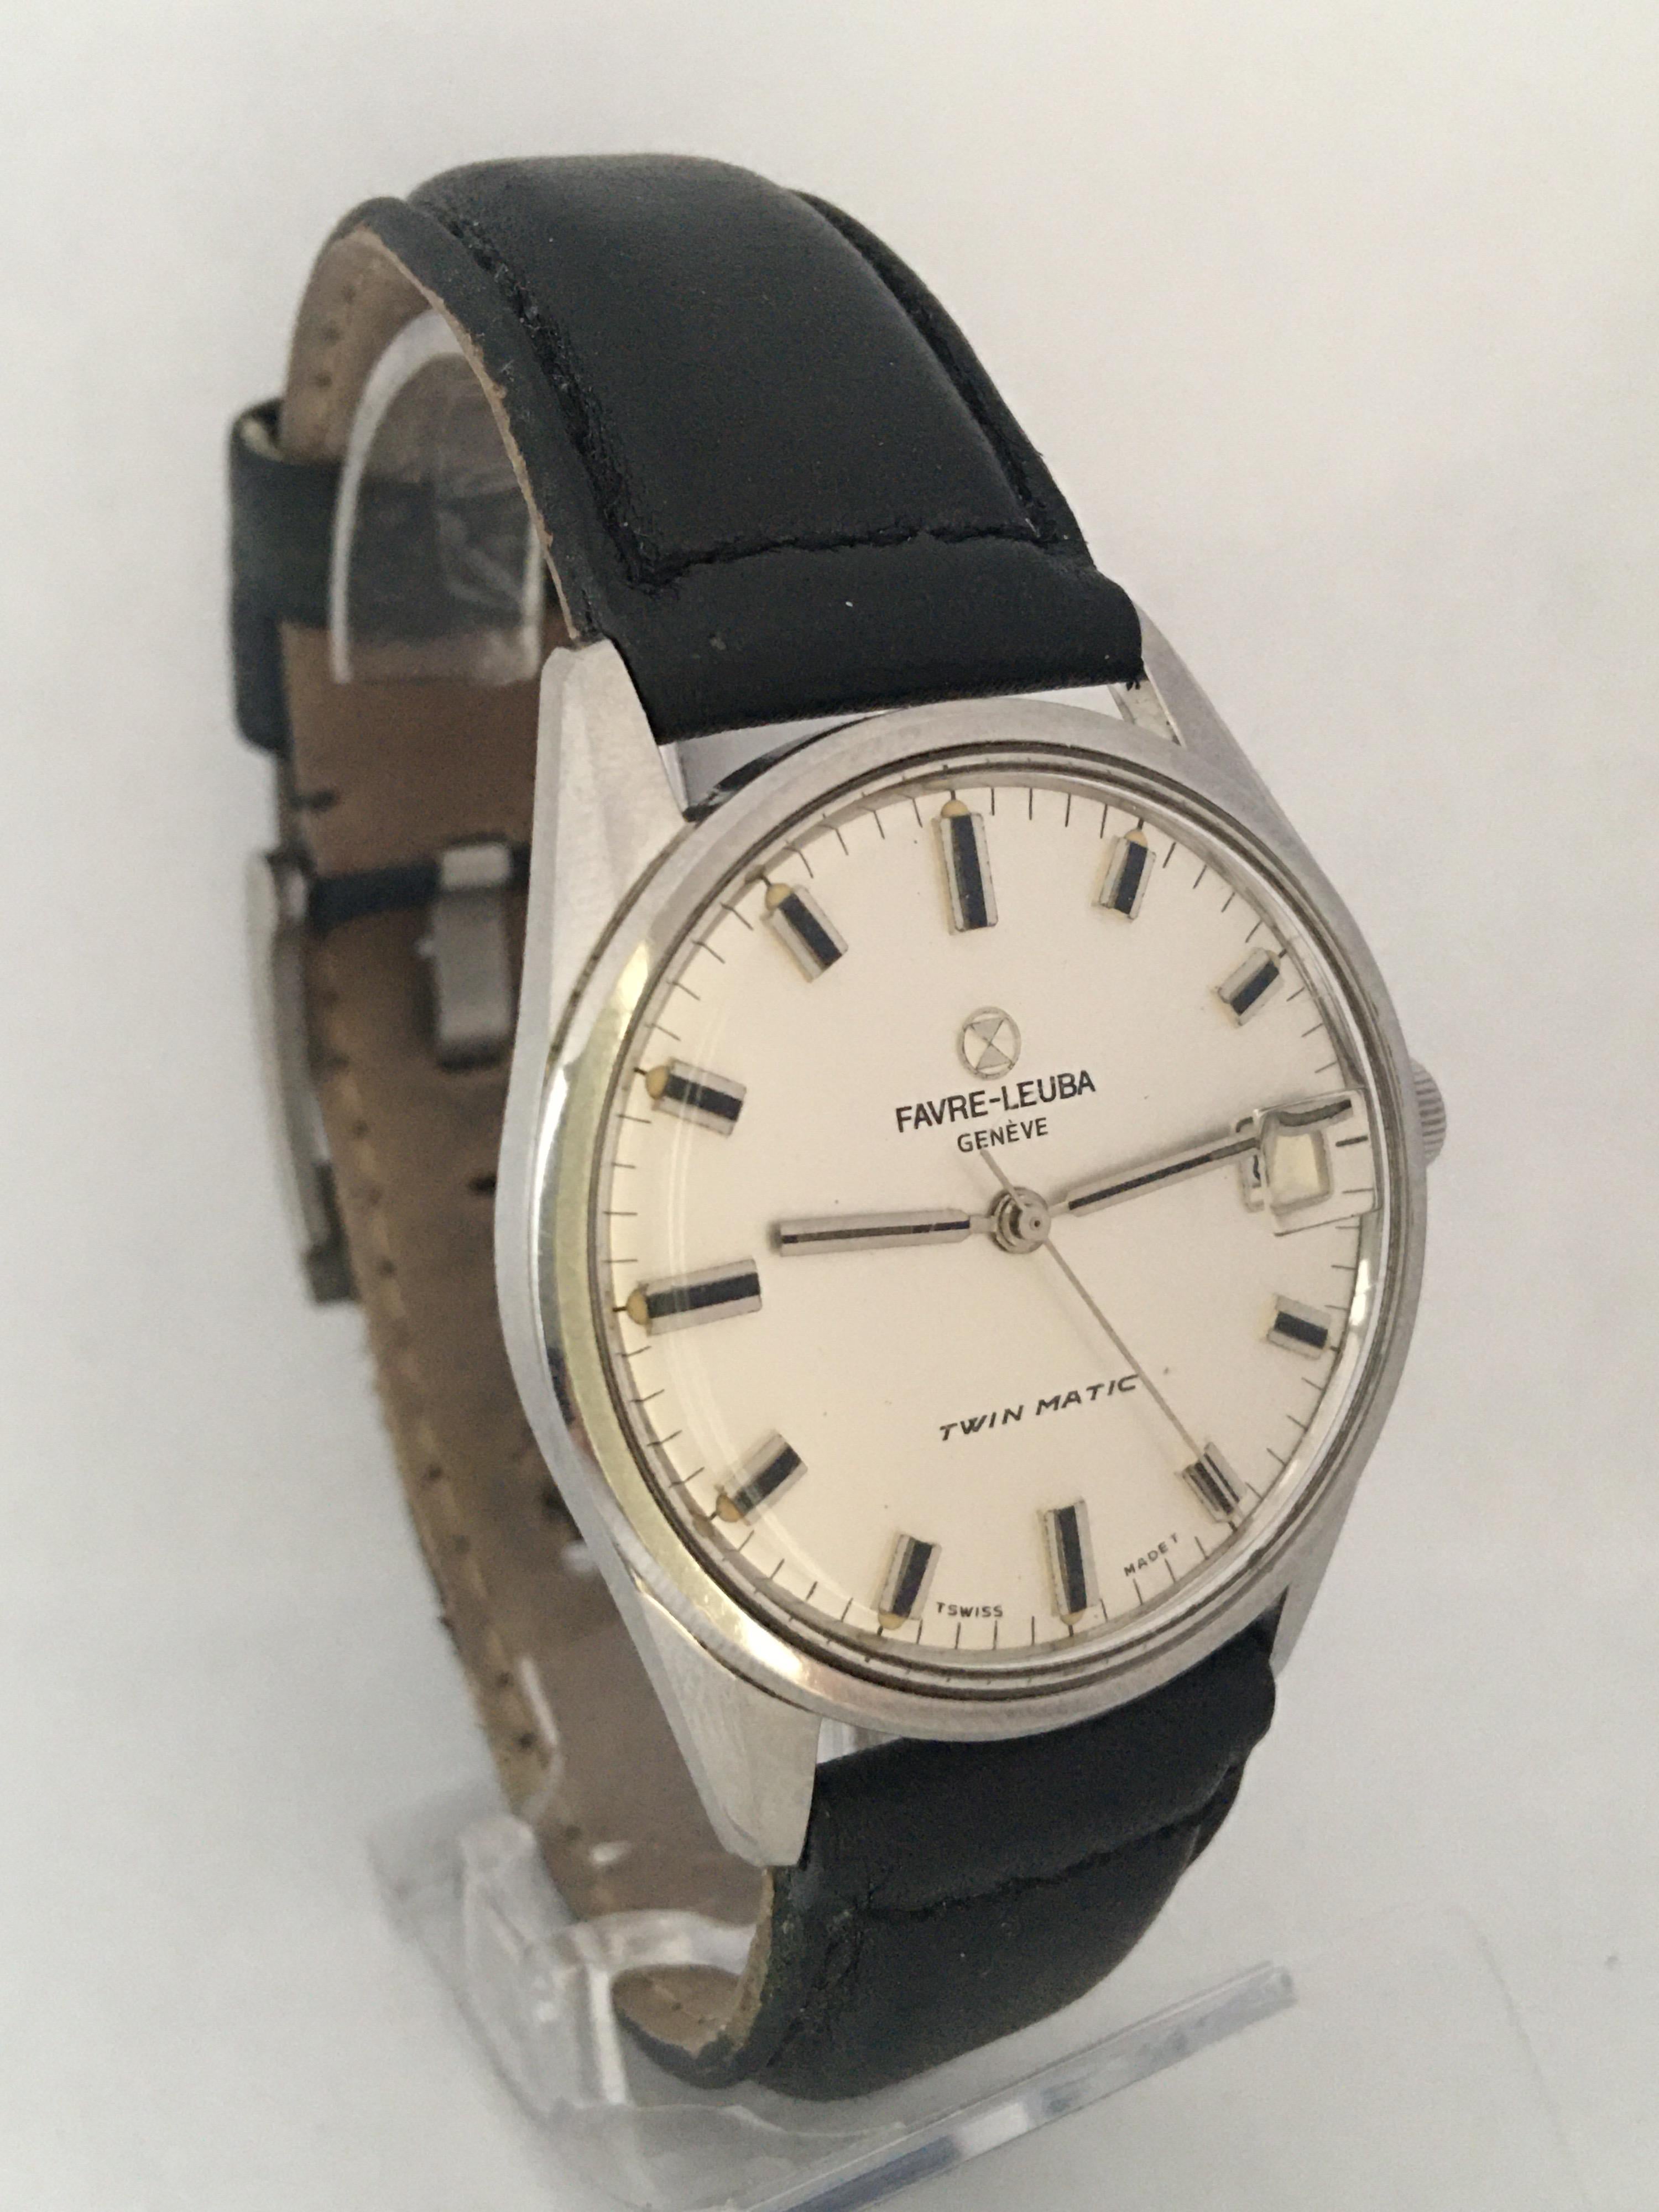 Vintage Stainless Steel Favre-Leuba Geneve Twin Matic Watch For Sale 4